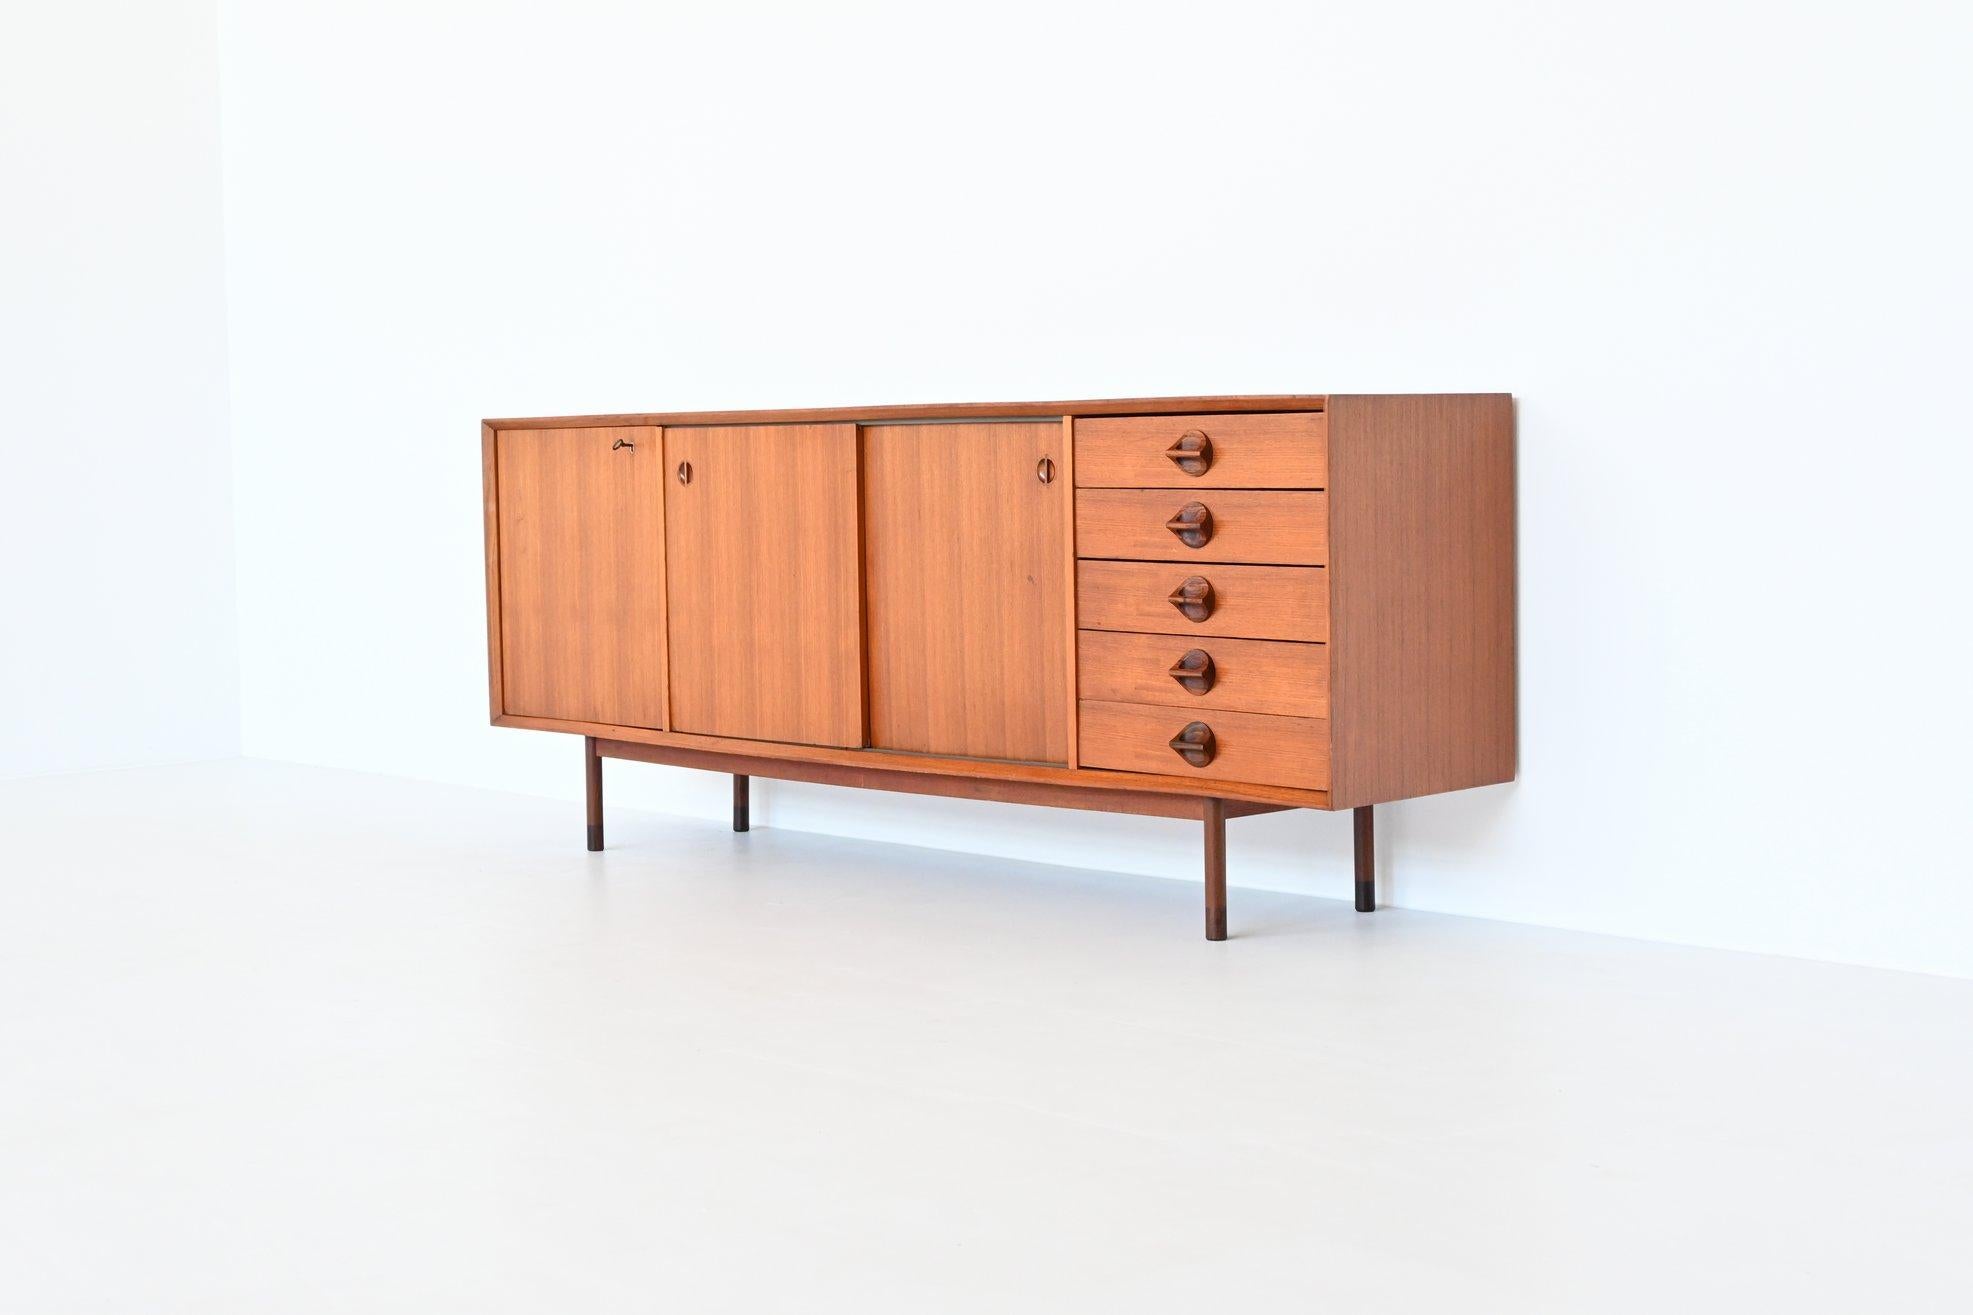 Beautiful sleek shaped sideboard model “Monika” designed and manufactured by Faram, Italy 1960. This sideboard is made of nicely grained teak wood supported by a solid teak wood frame with rosewood feet tips. It has two reversible sliding doors and